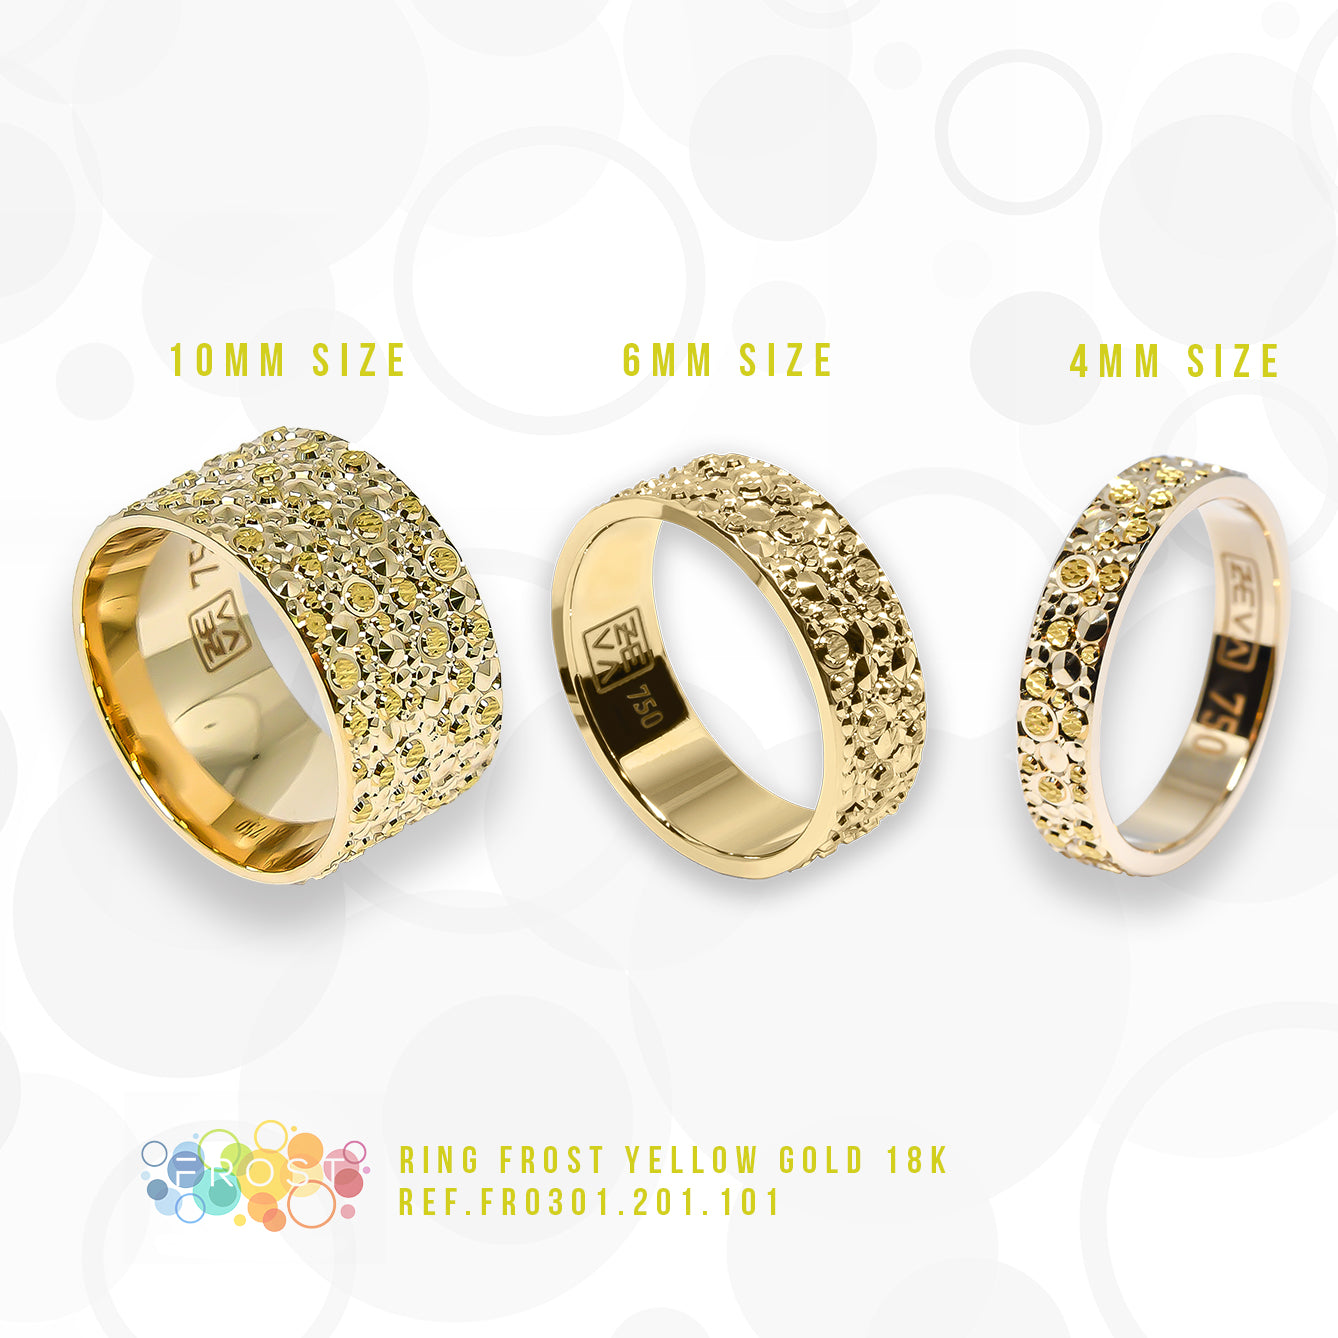 Ring FROST 4mm yellow gold 18k 750